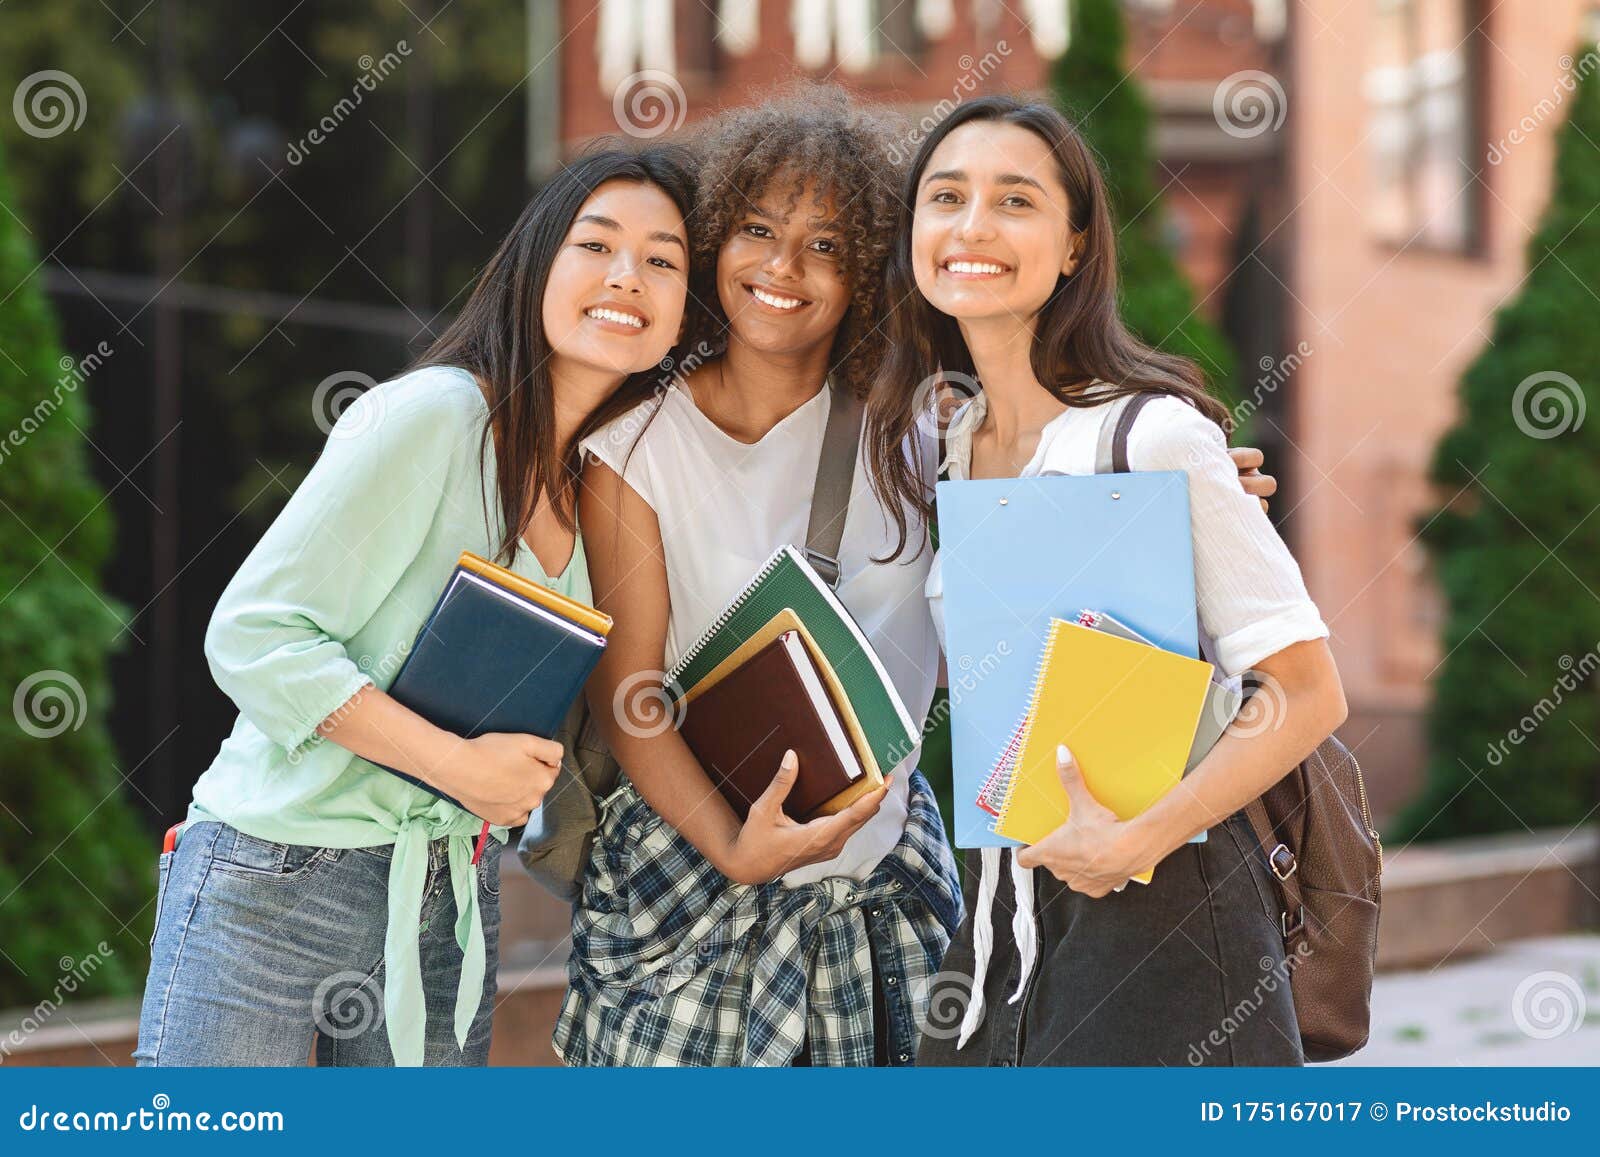 Students College Girls